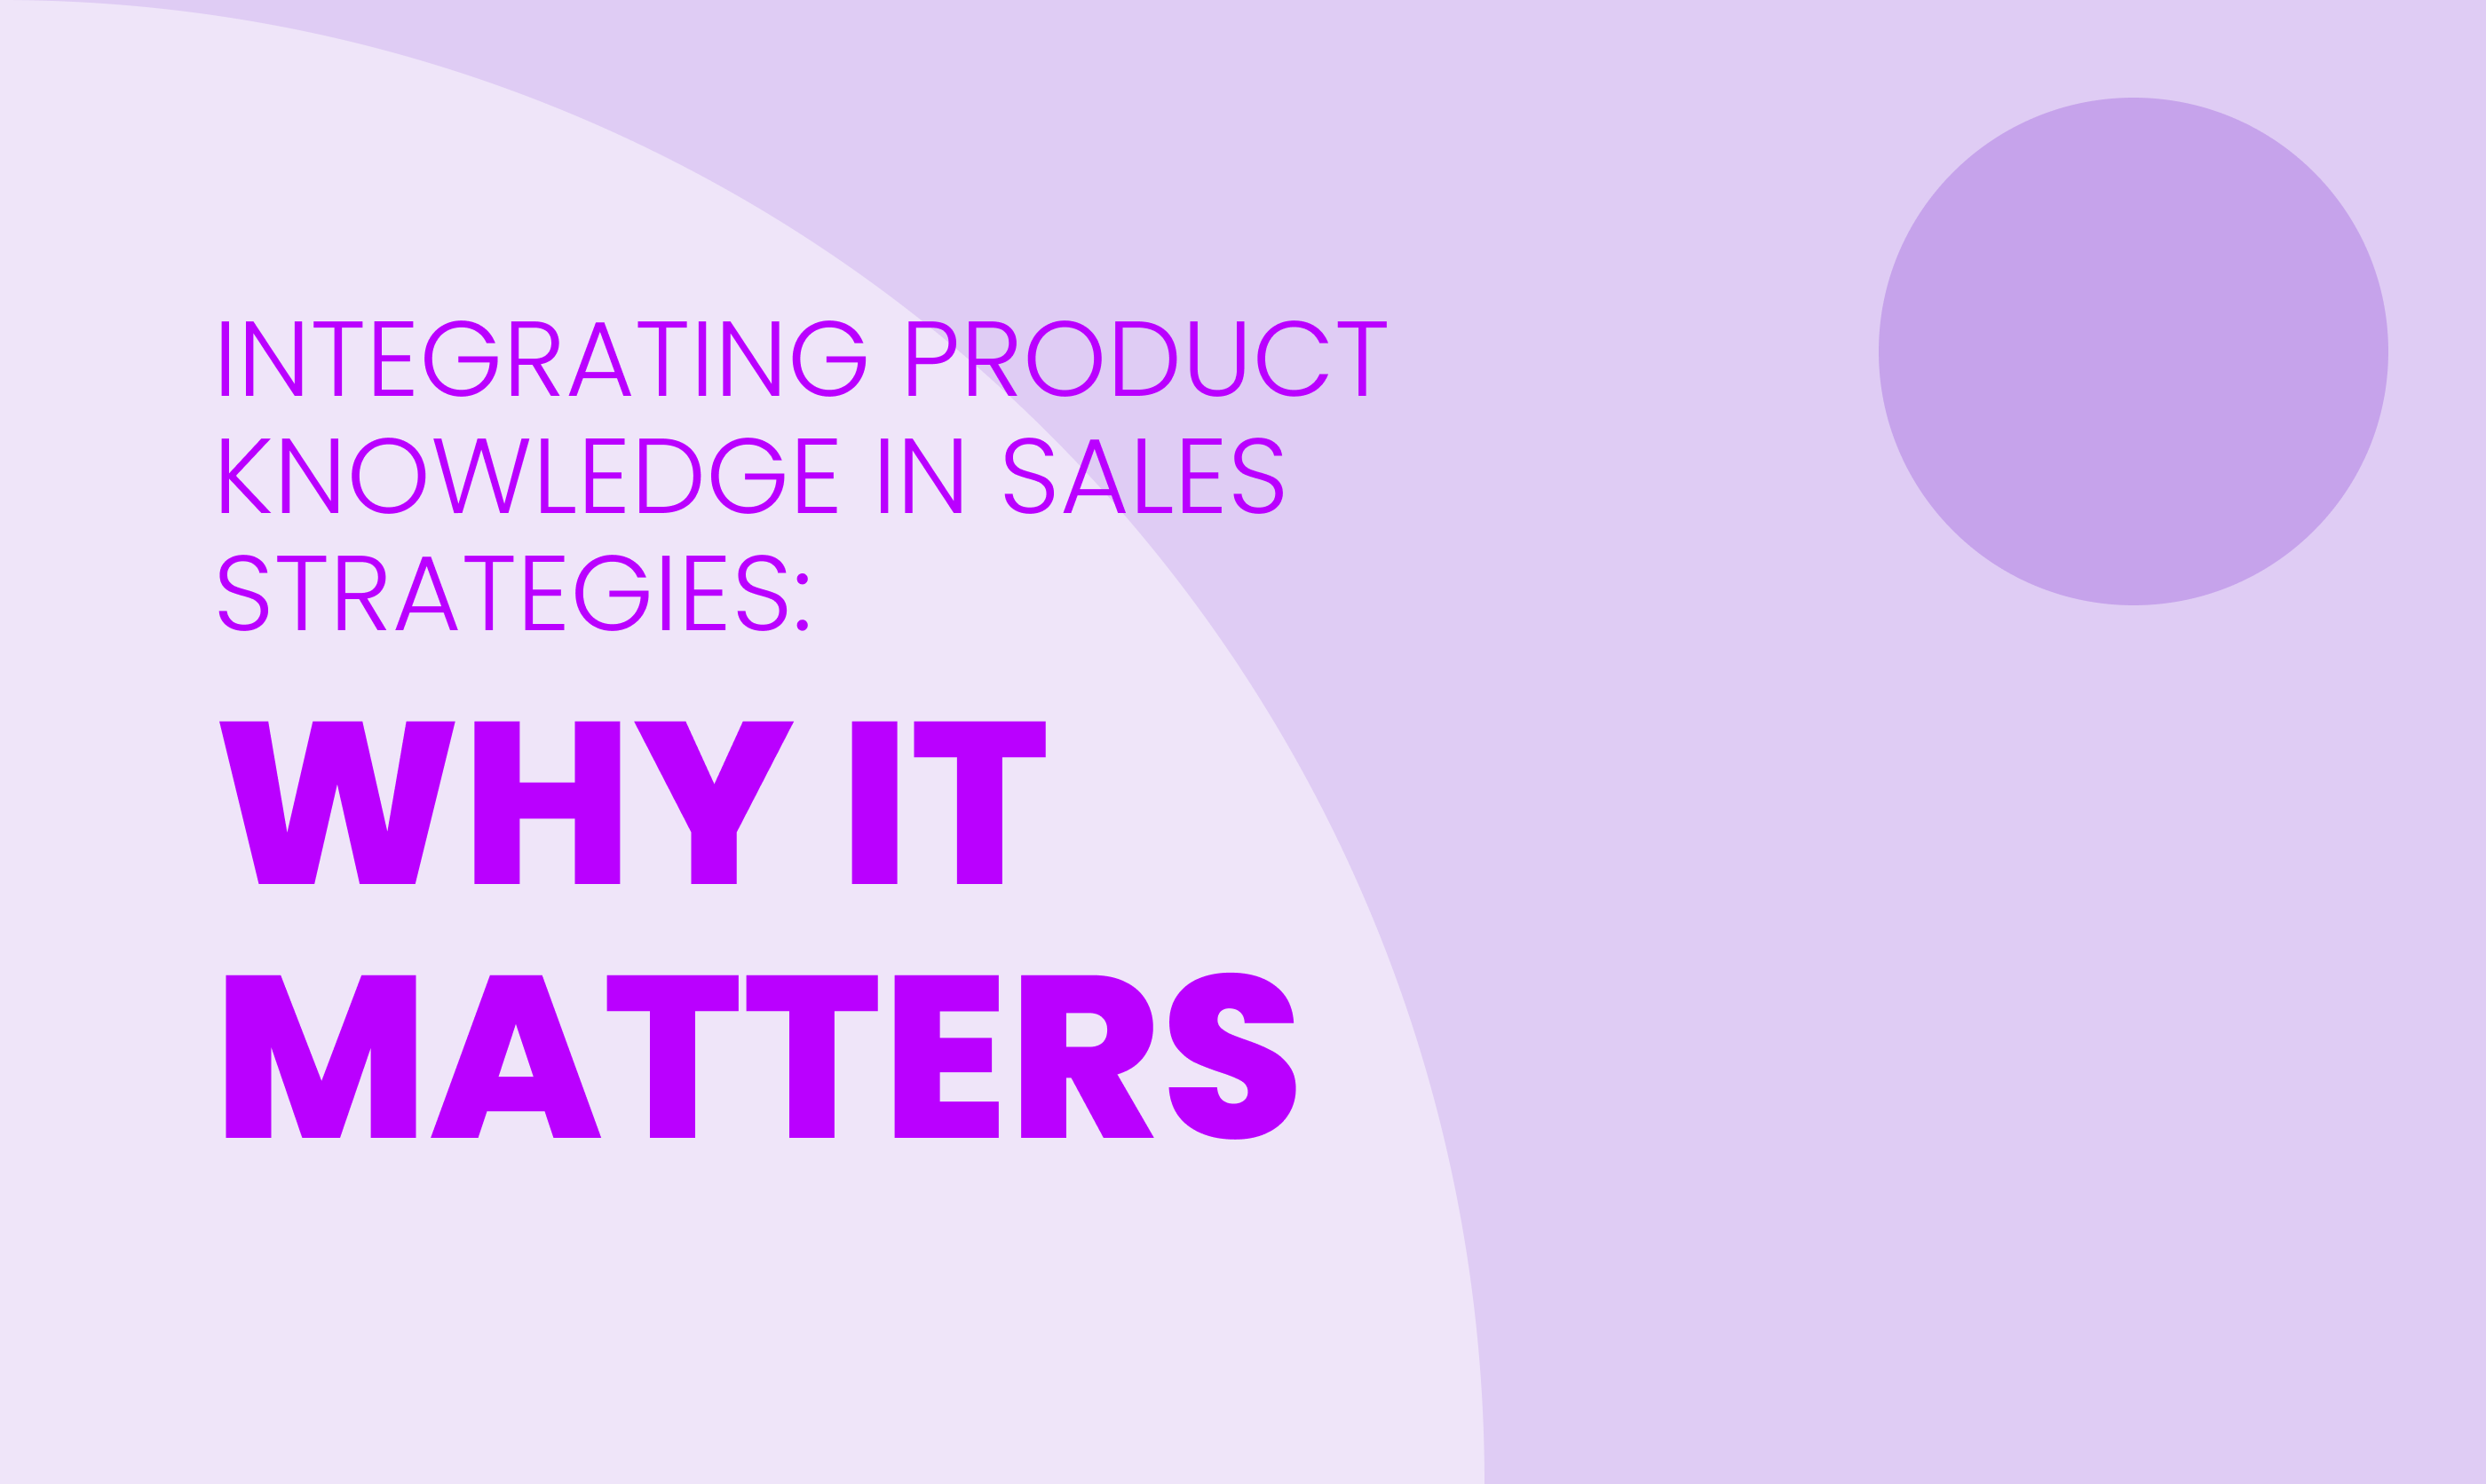 INTEGRATING PRODUCT KNOWLEDGE IN SALES STRATEGIES:  WHY IT MATTERS